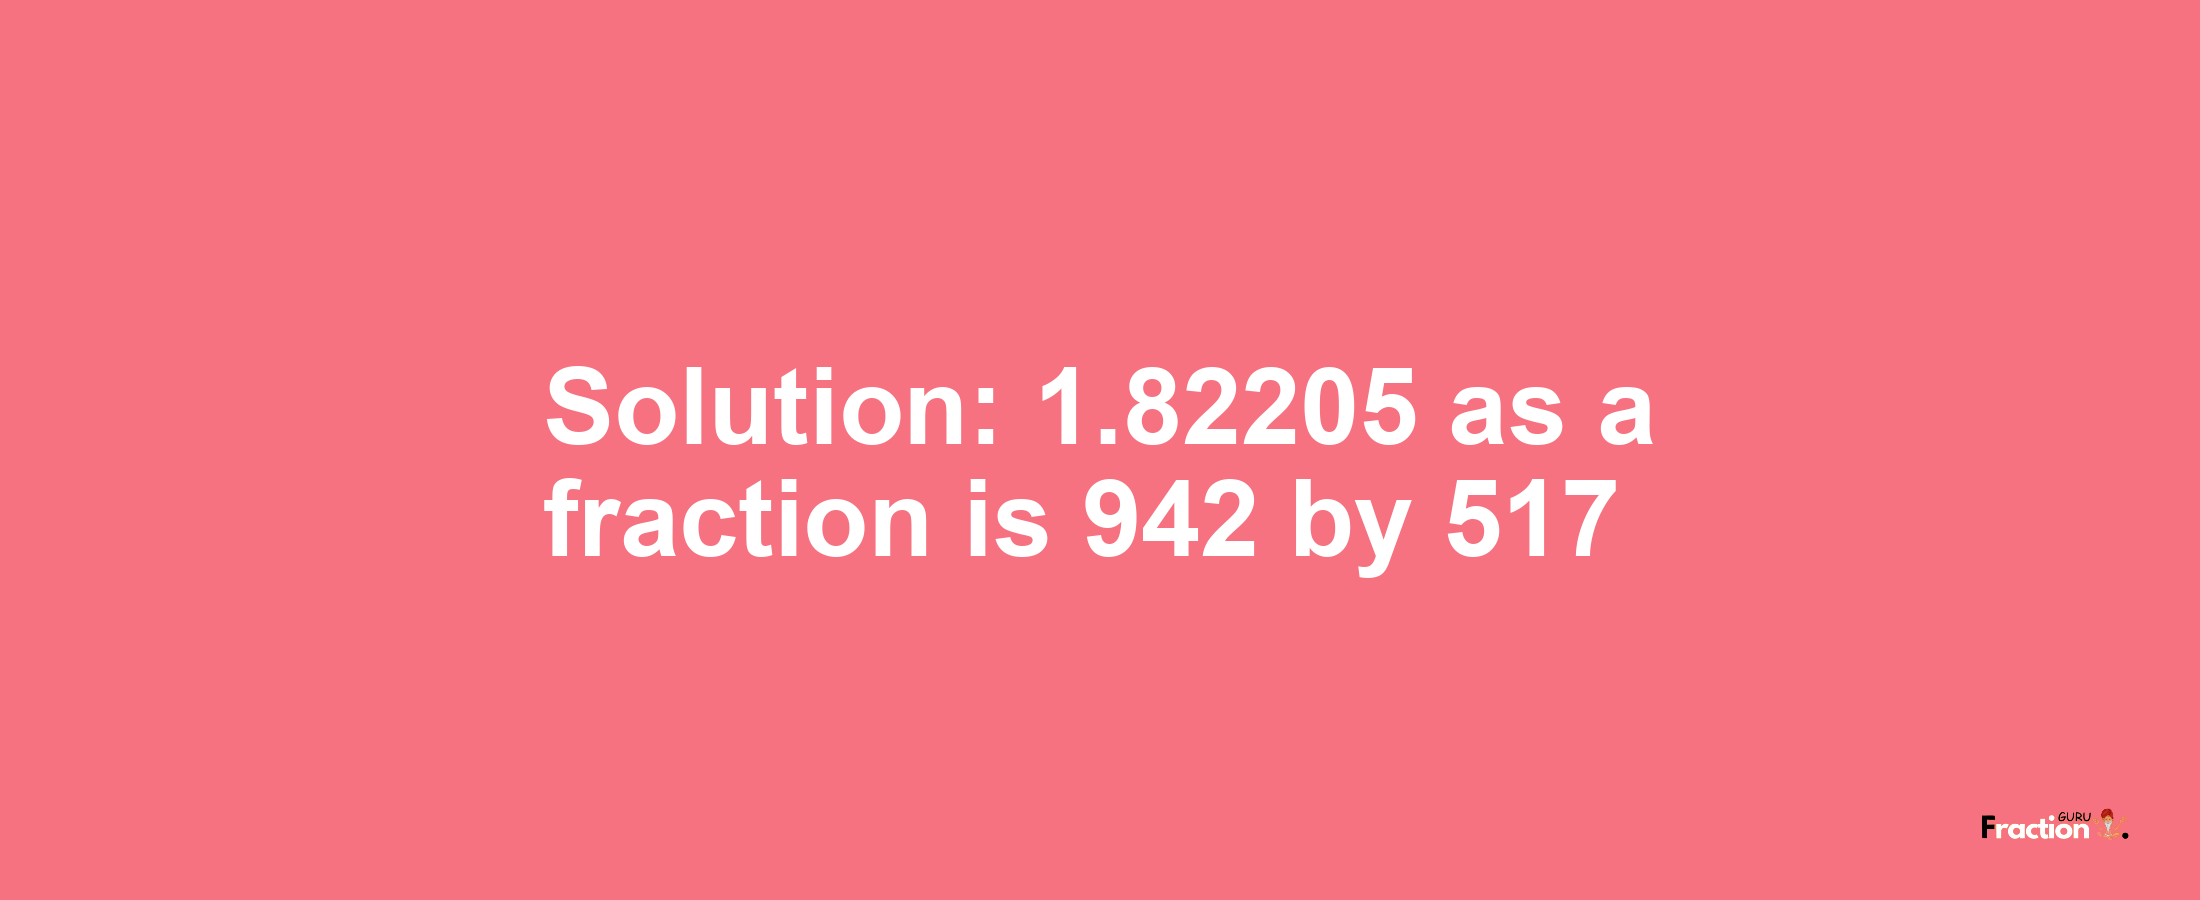 Solution:1.82205 as a fraction is 942/517